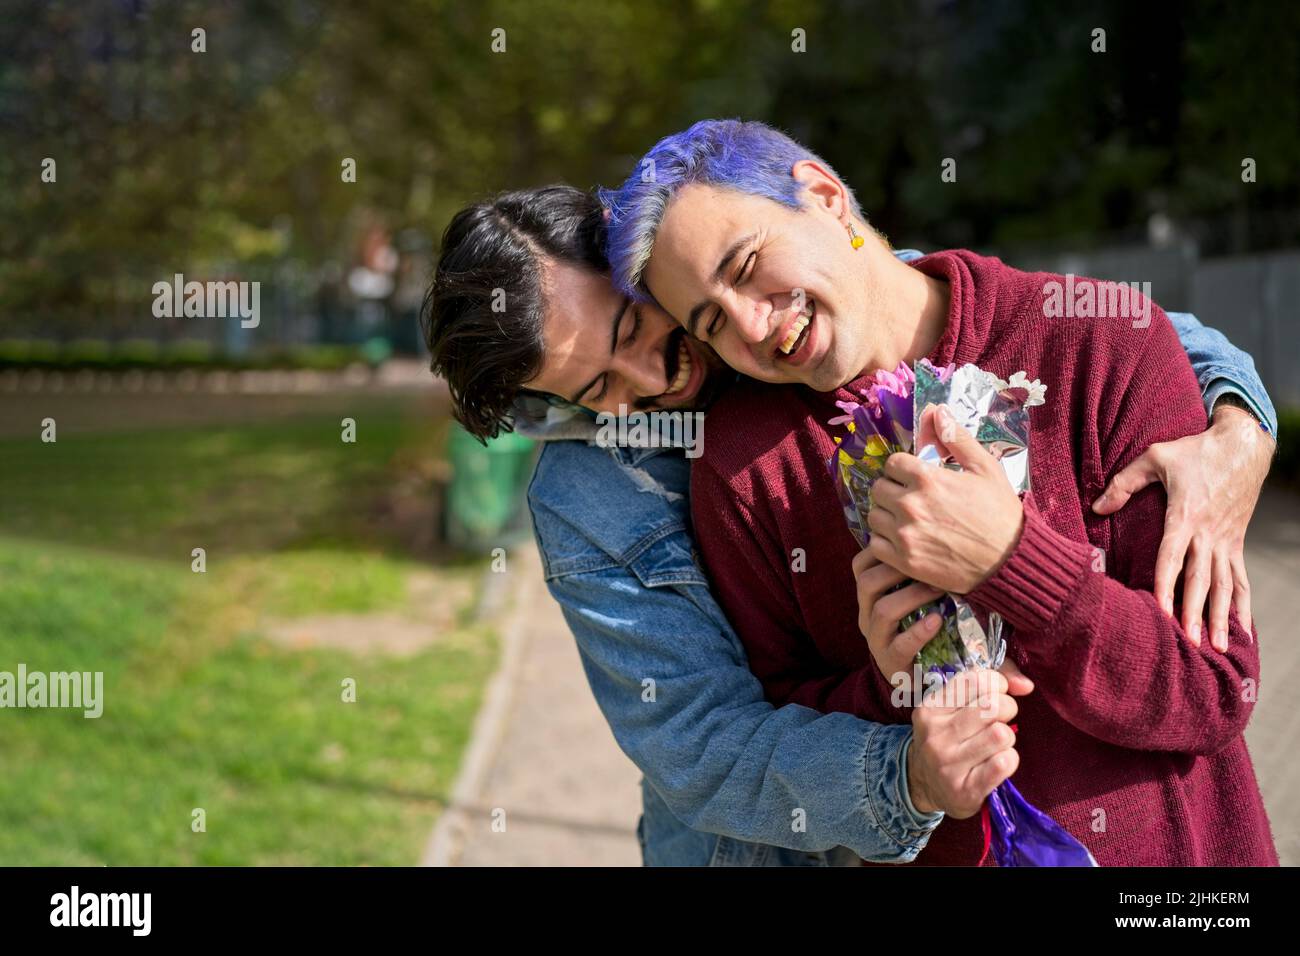 Couple of Latino gay men in a park embracing each other. One surprising the other with a bouquet of flowers as a gift Stock Photo